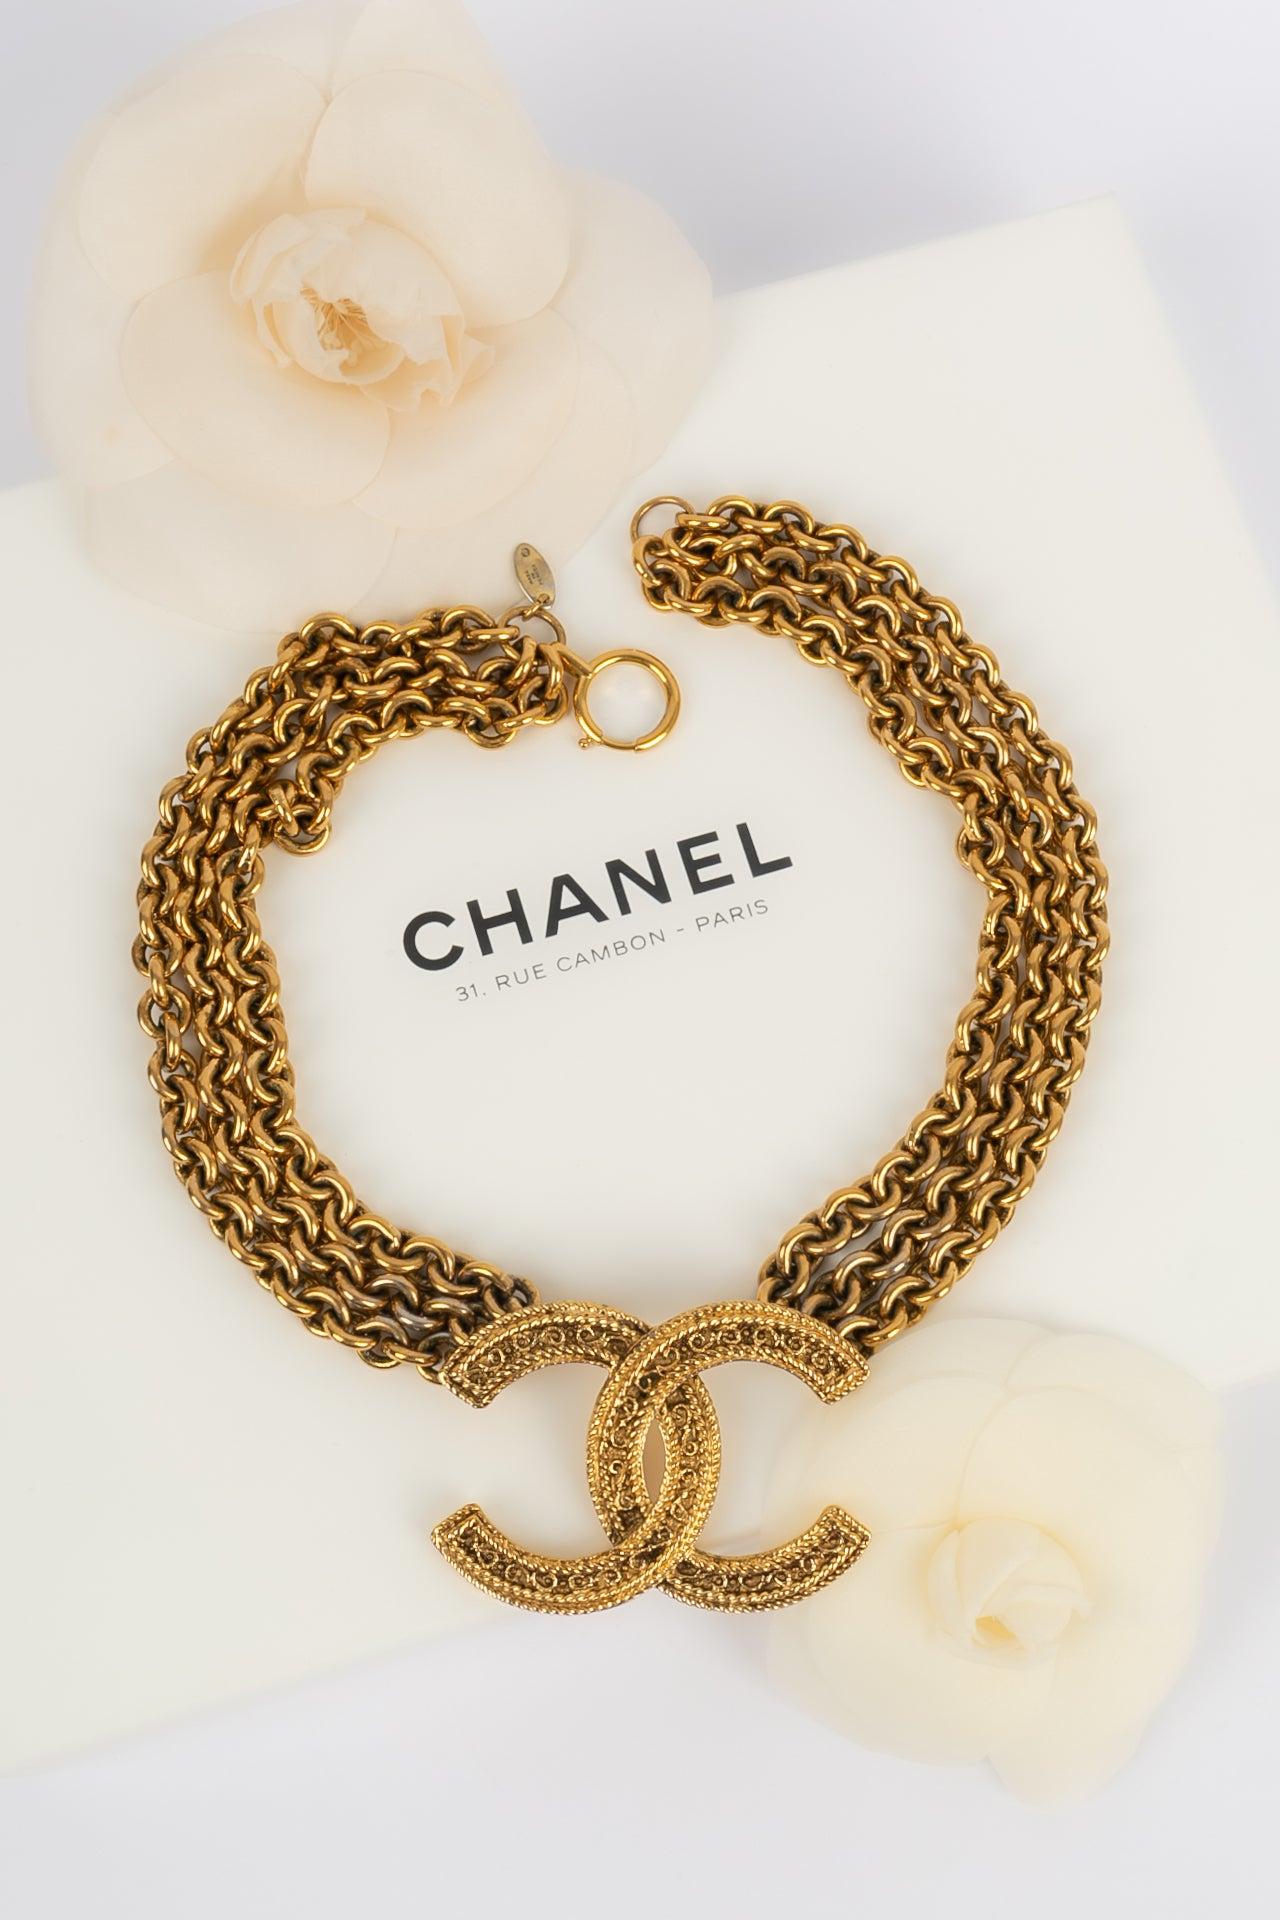 Chanel - (Made in France) Short necklace made of three gold metal chains and a central cc pendant. Collection 1985.

Additional information:
Dimensions: Length of the shortest row: 45 cm
Condition: Very good condition
Seller Ref number: CB202